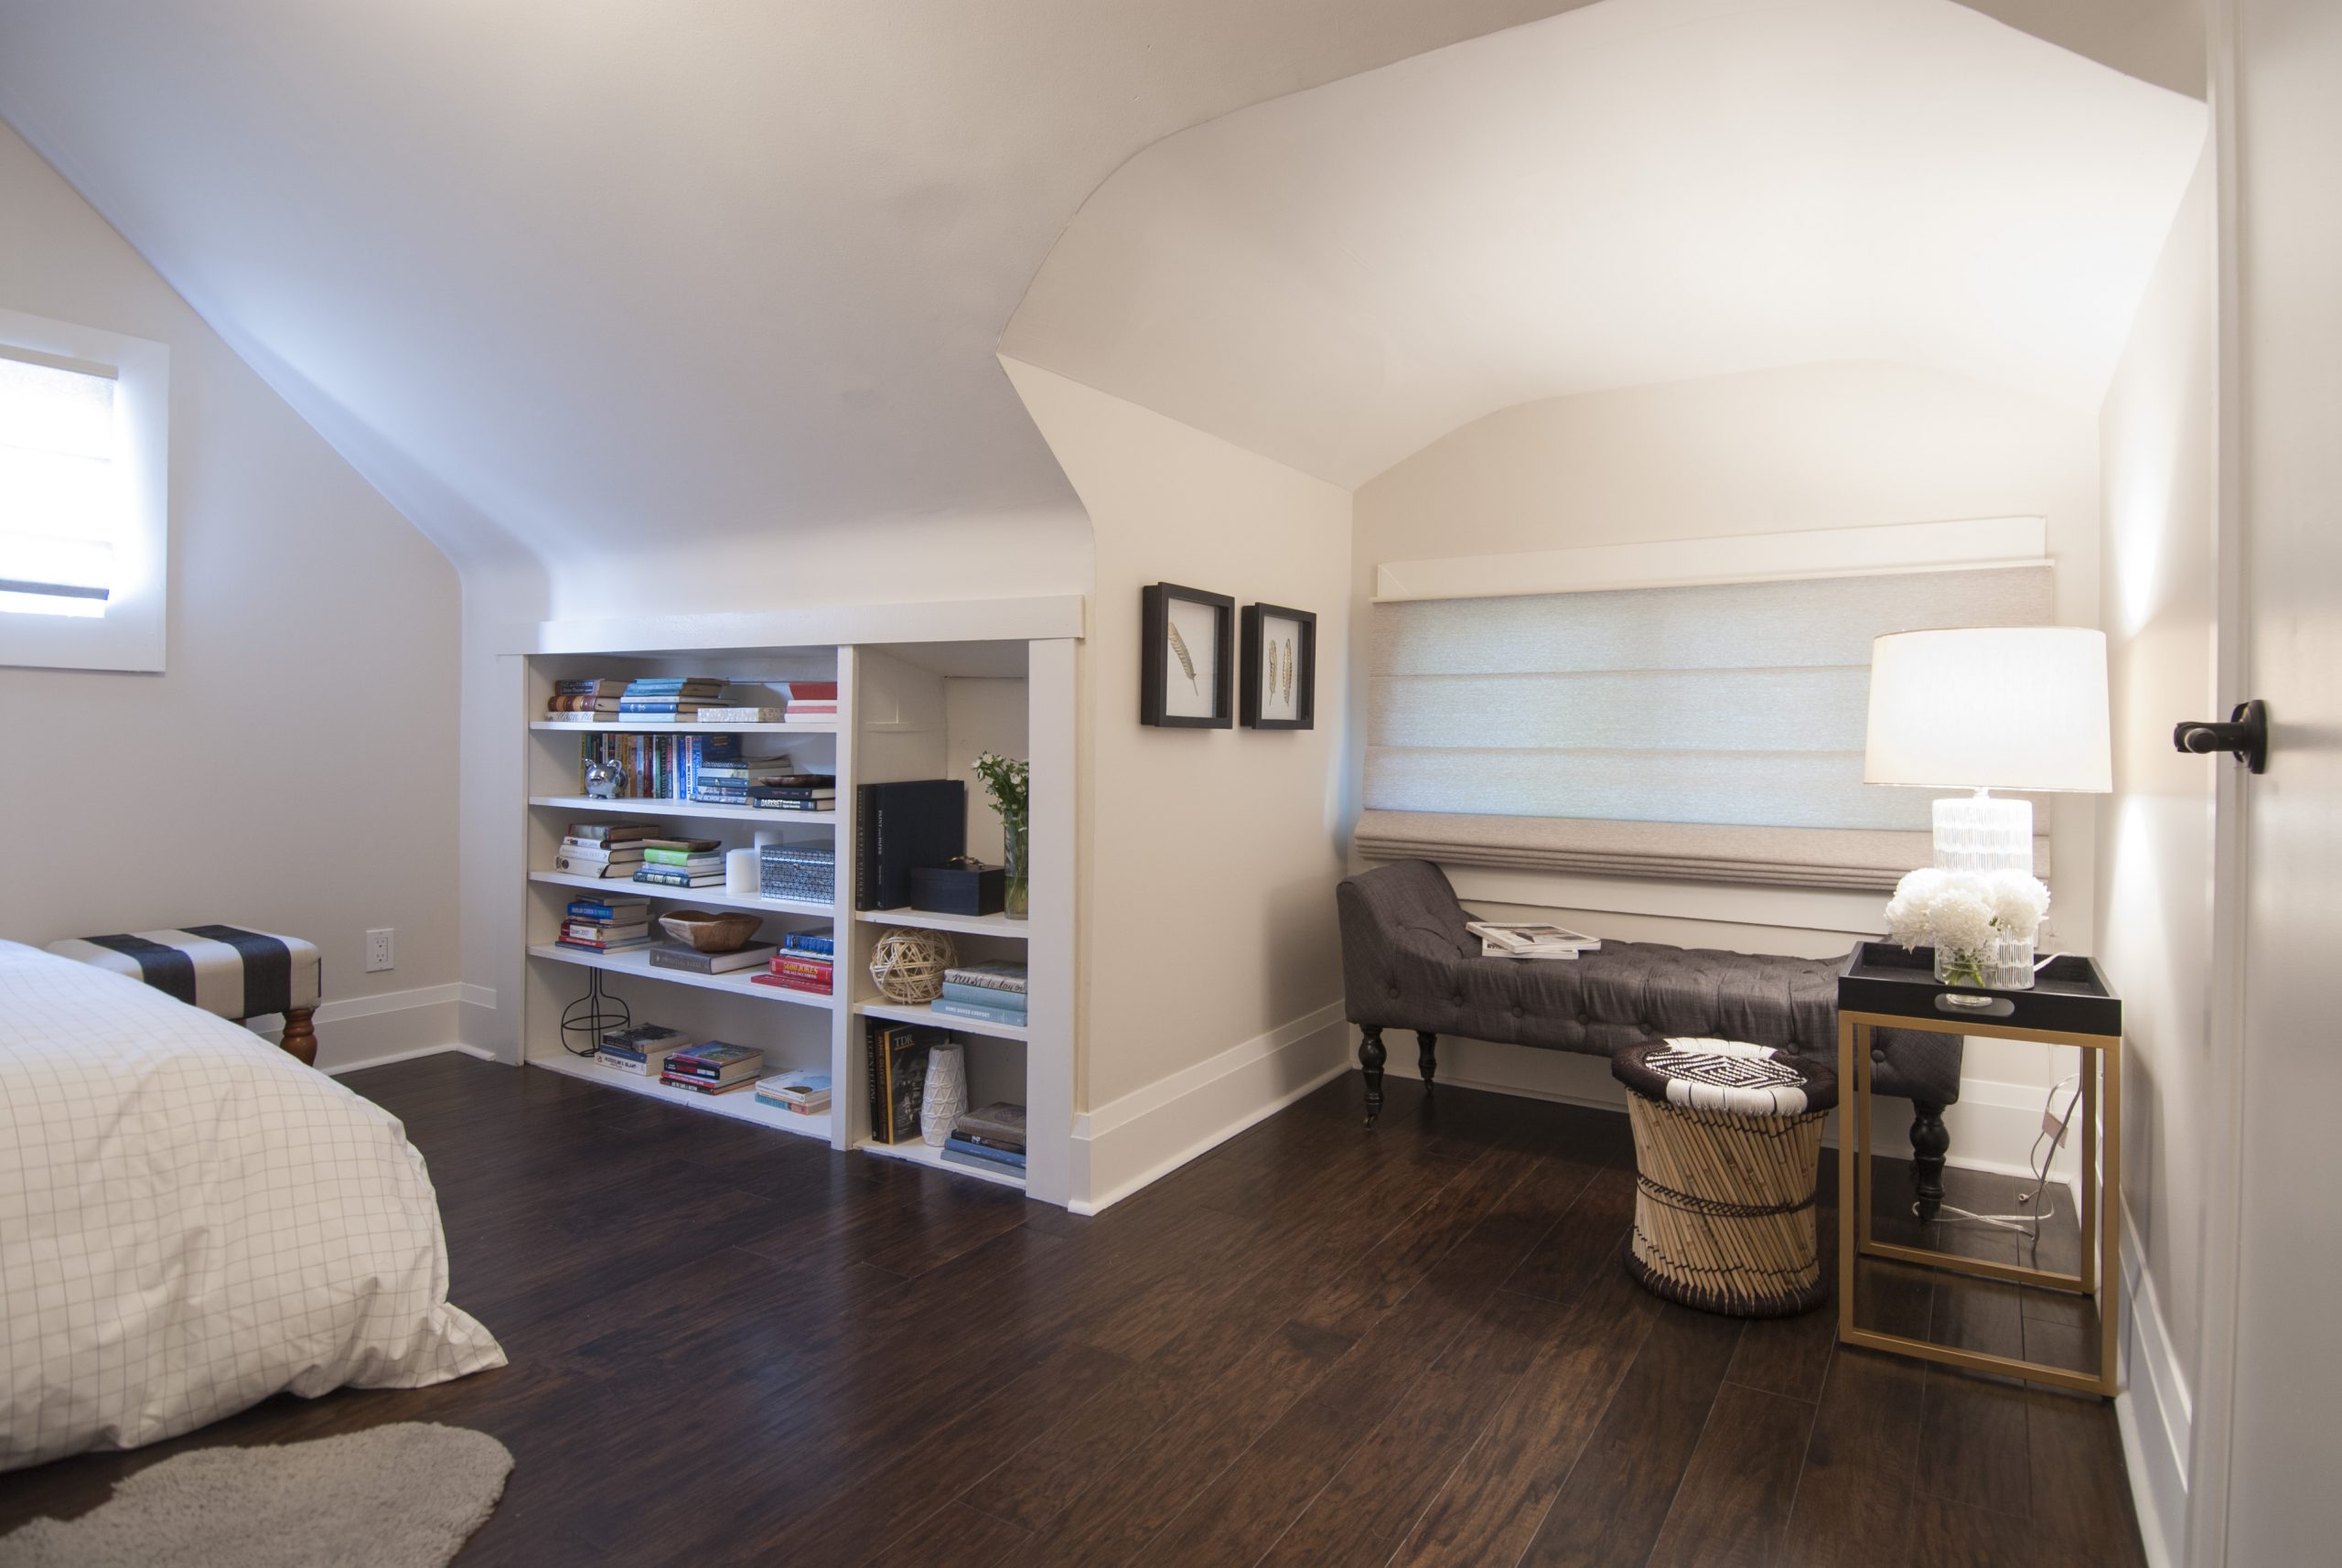 Attic bedroom with low ceilings